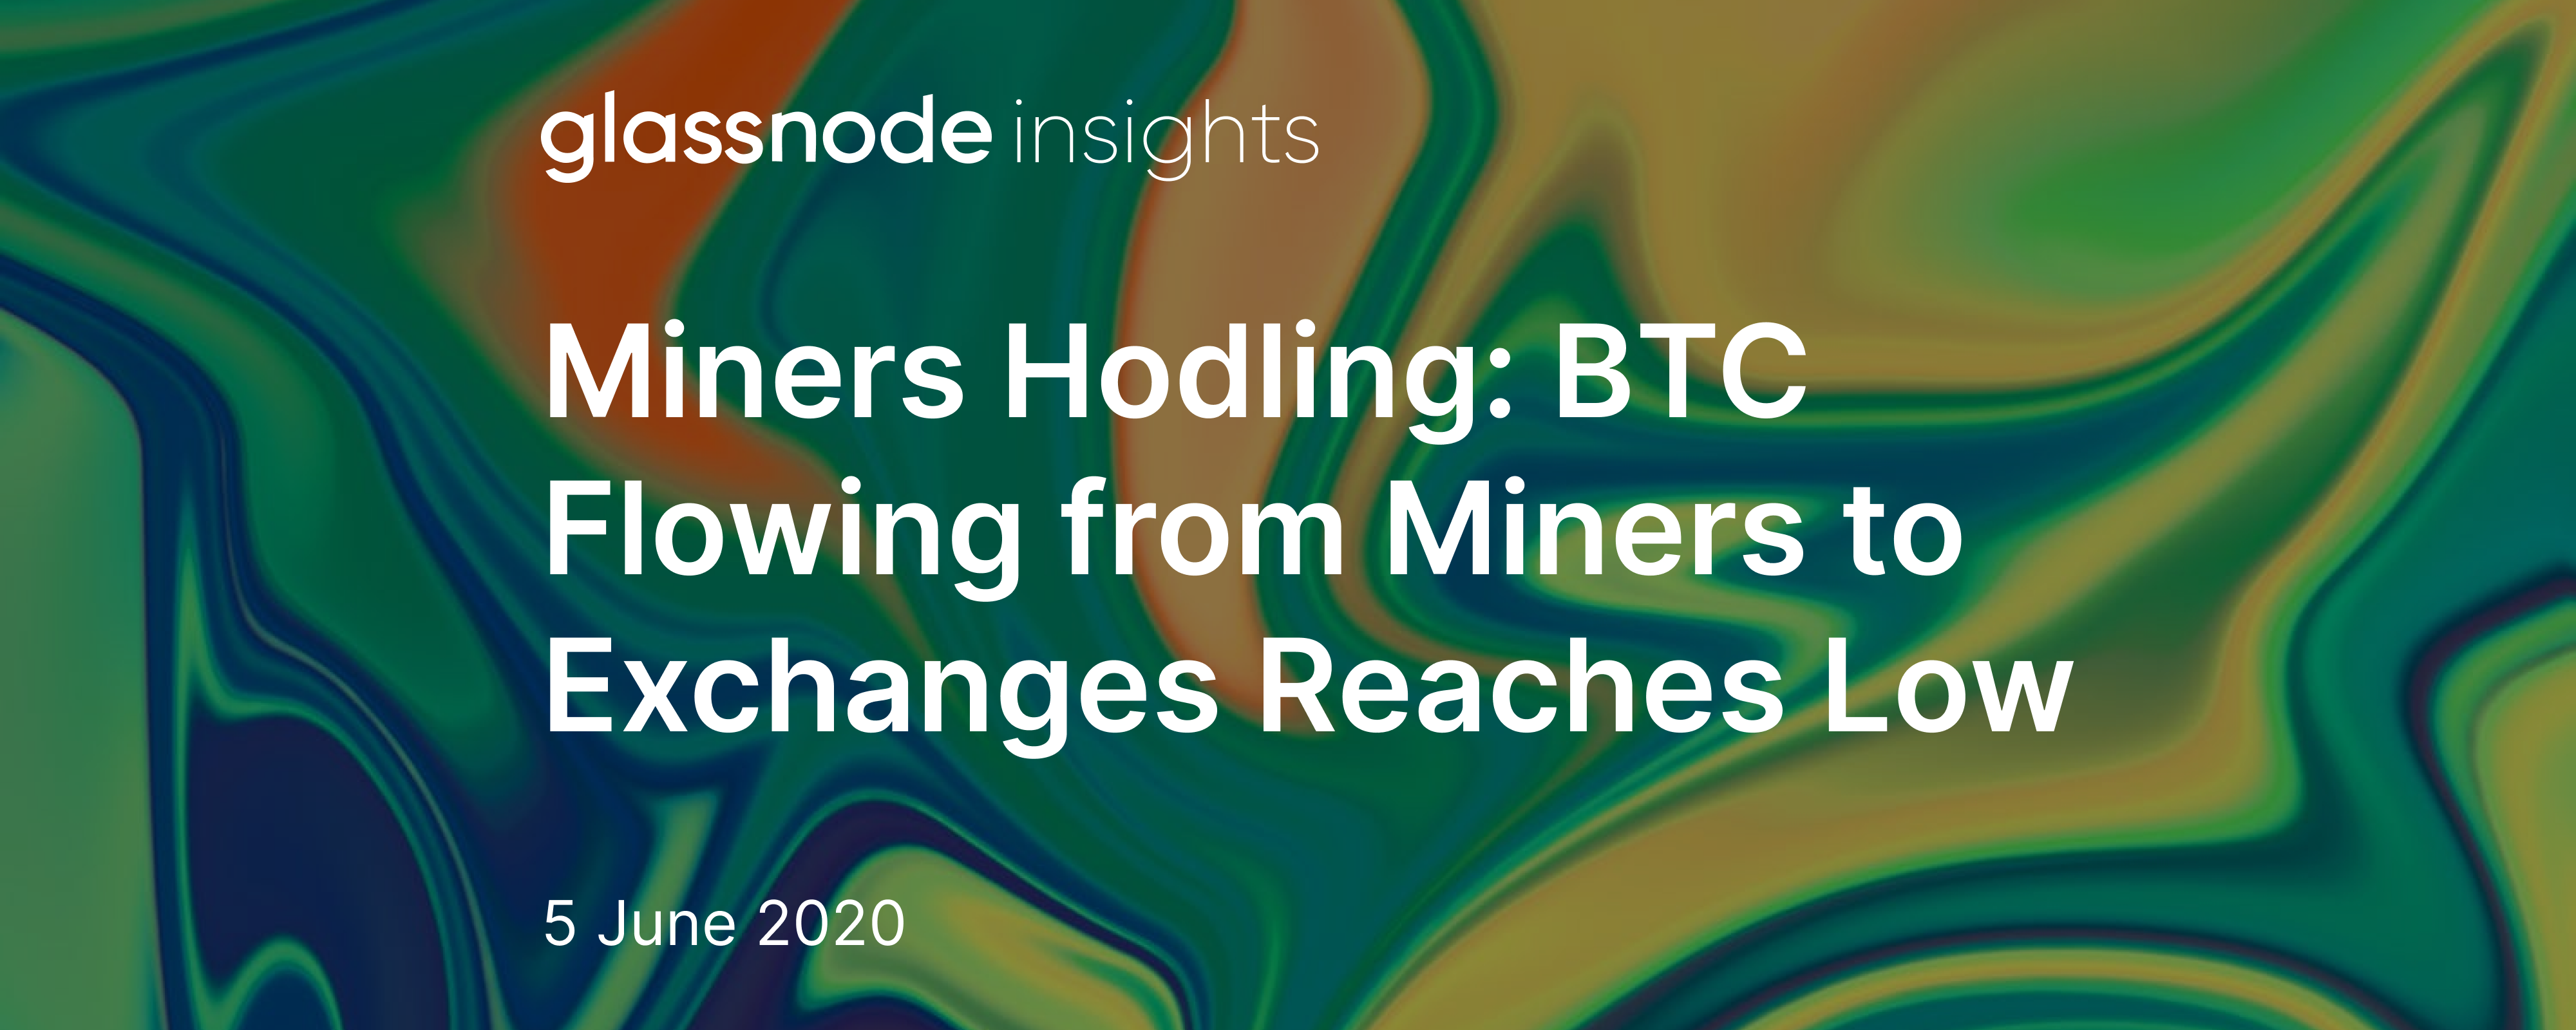 Miners Hodling: BTC Flowing from Miners to Exchanges Reaches 1-Year Low